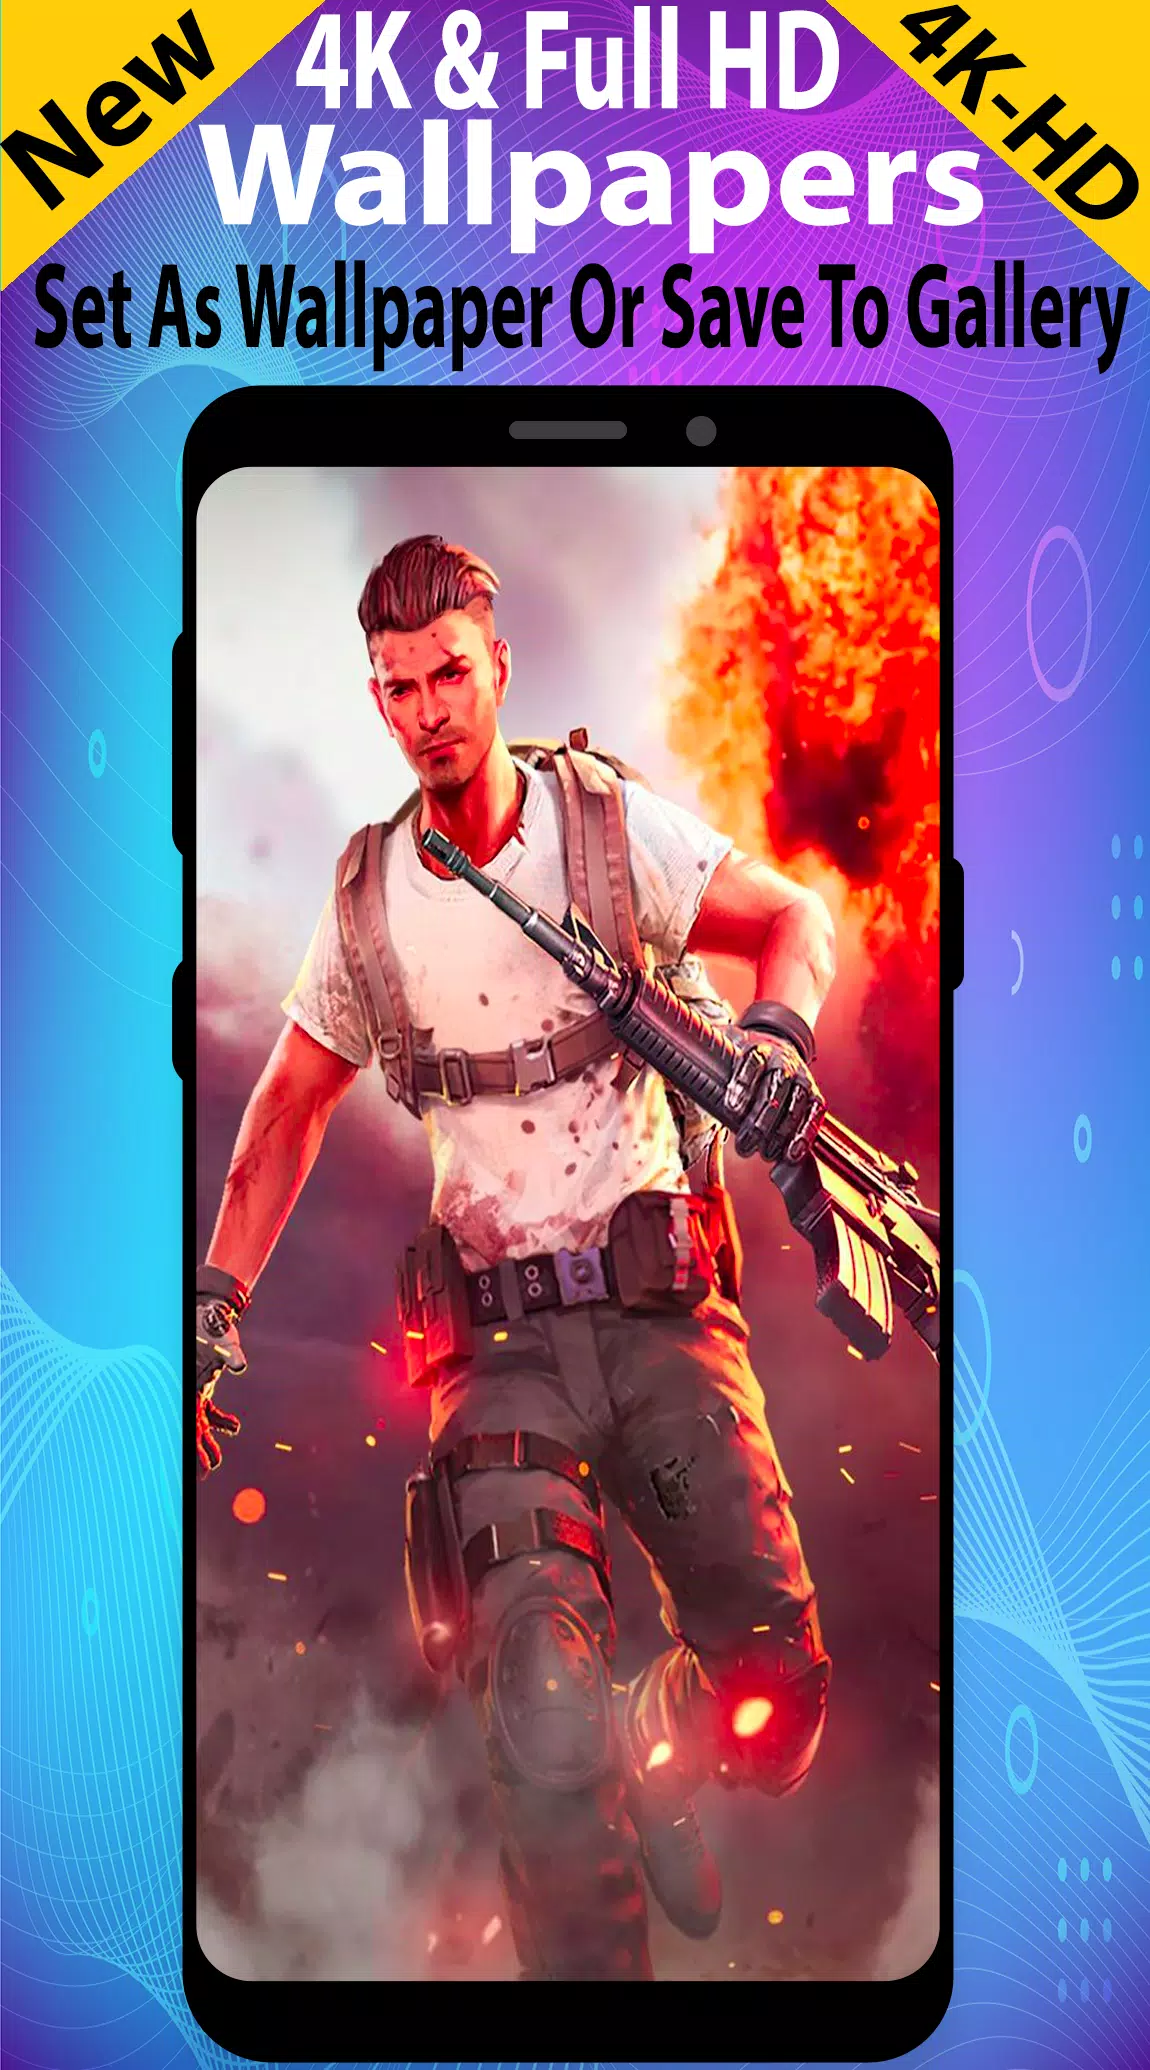 Garena Free Fire Latest HD Wallpapers 2019  Game download free, Latest hd  wallpapers, Wallpaper wa